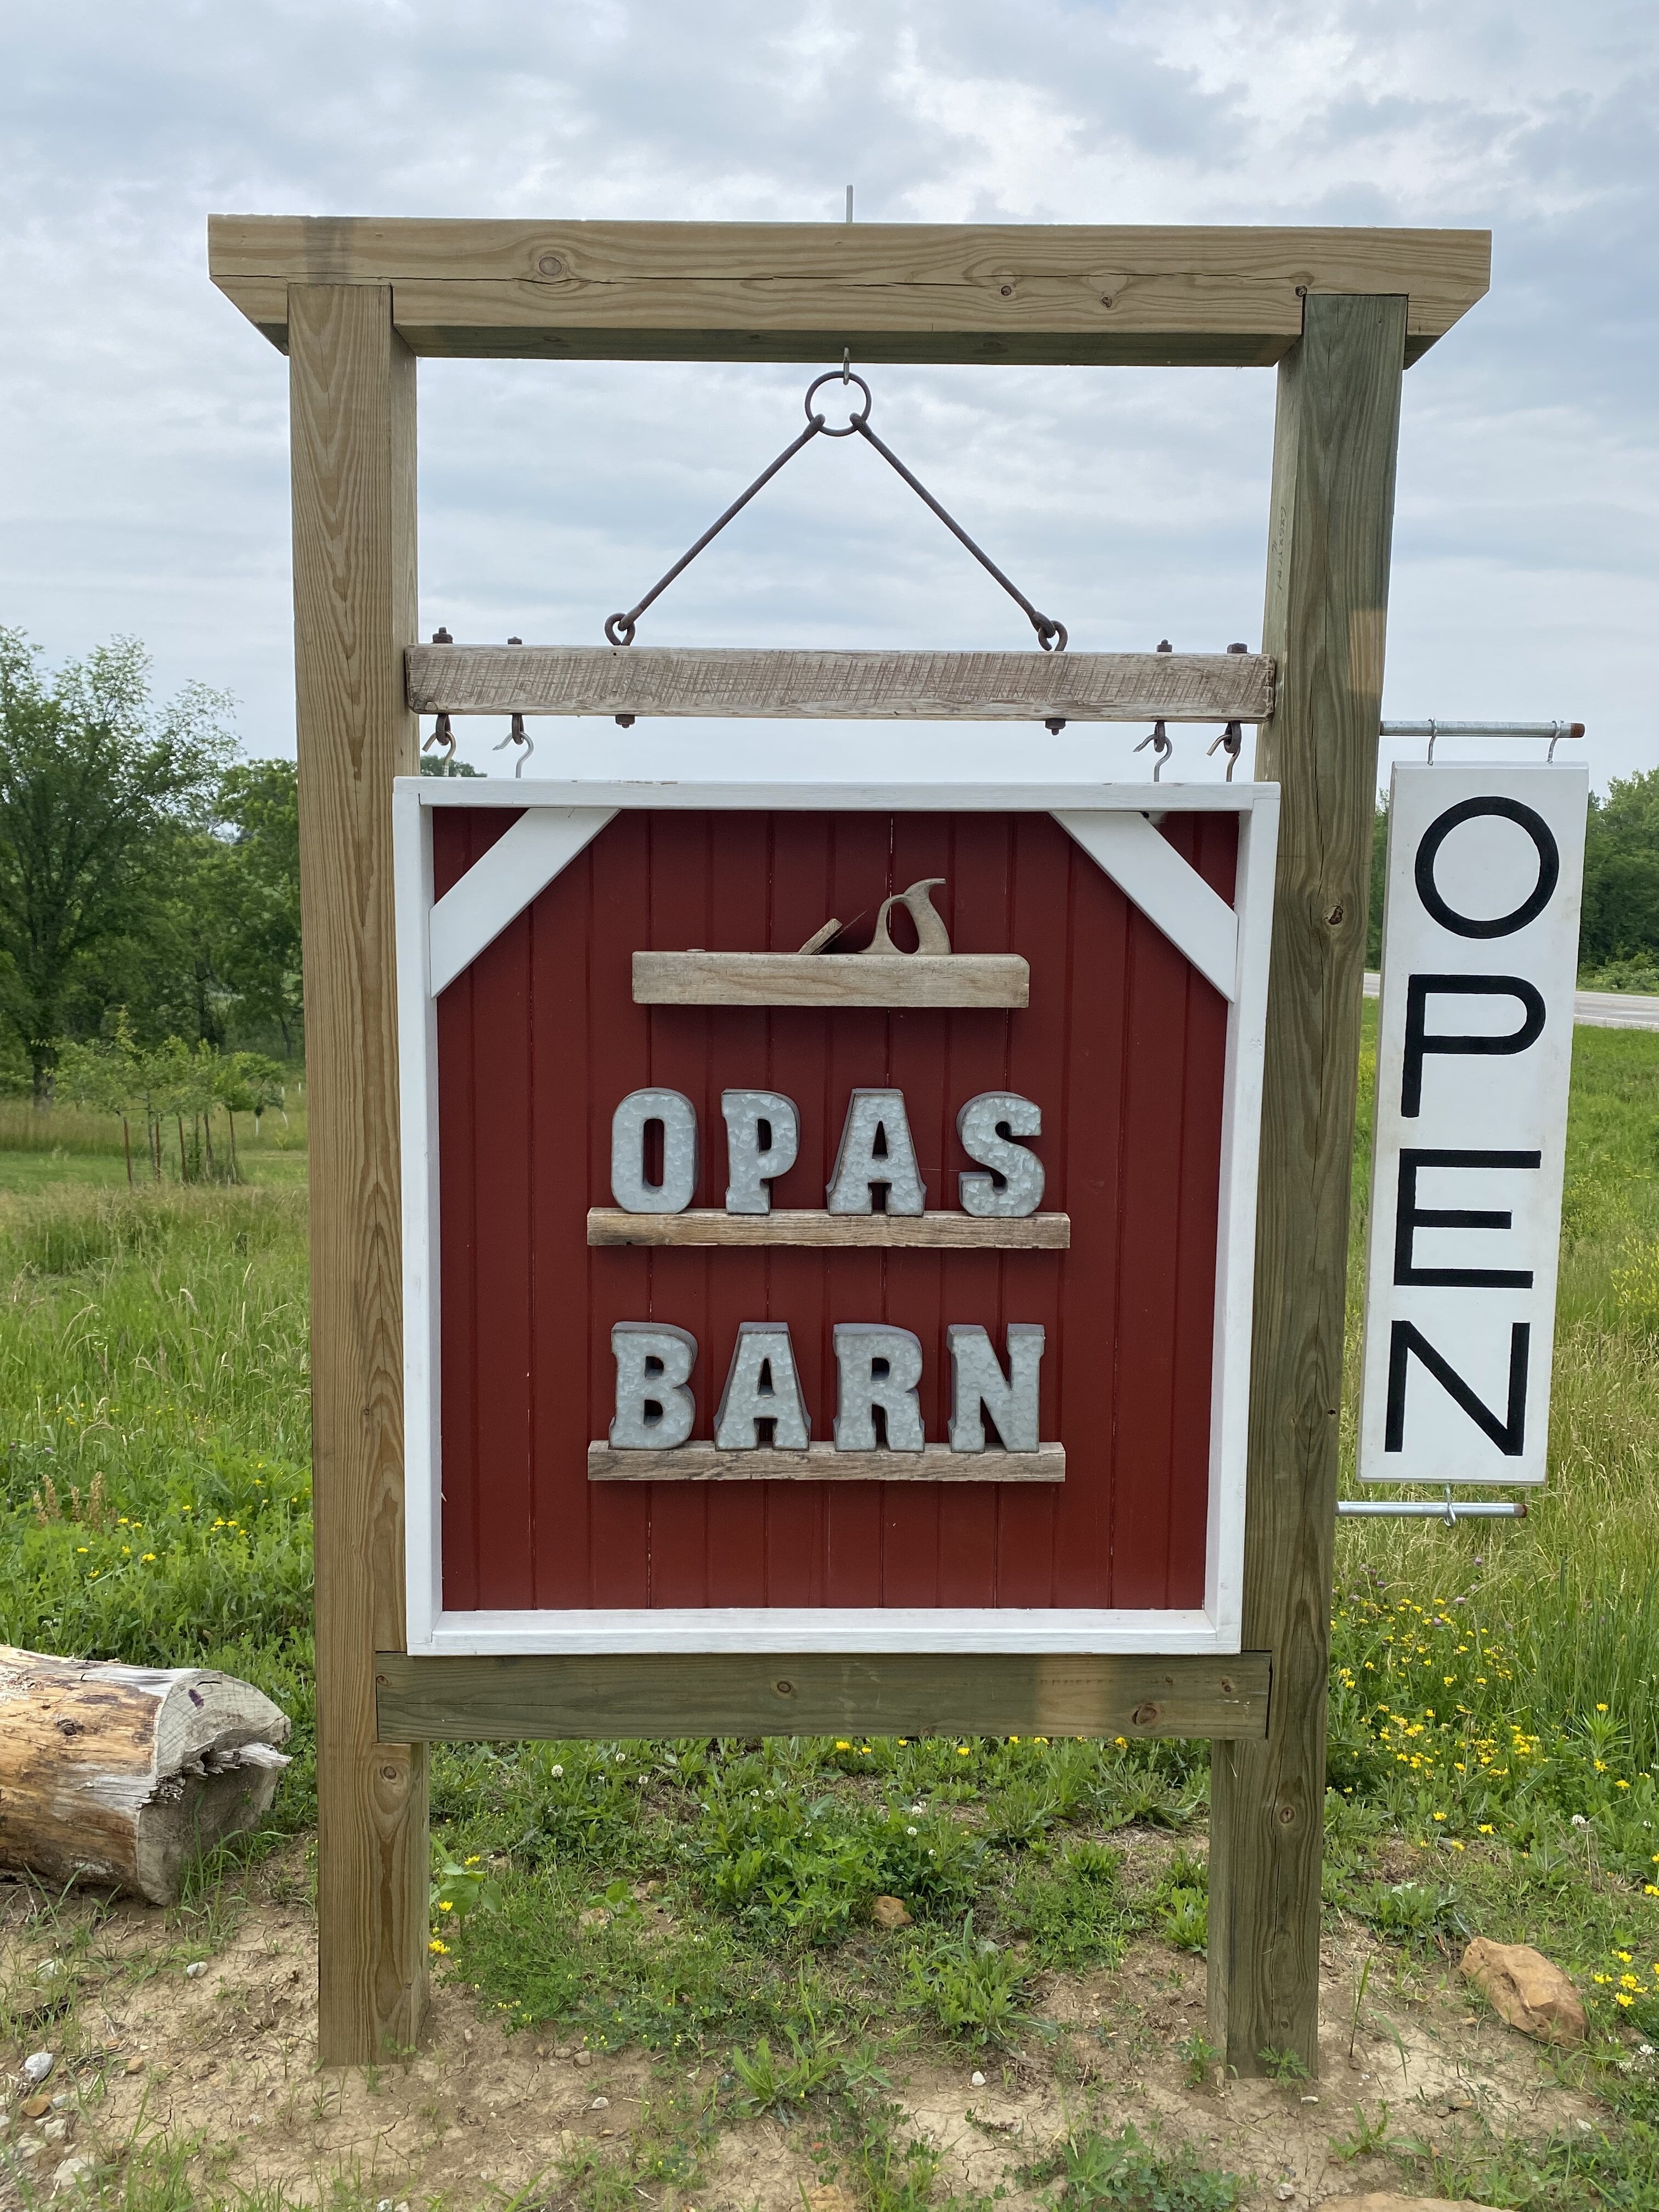 Open sign stating the name Opa's Barn